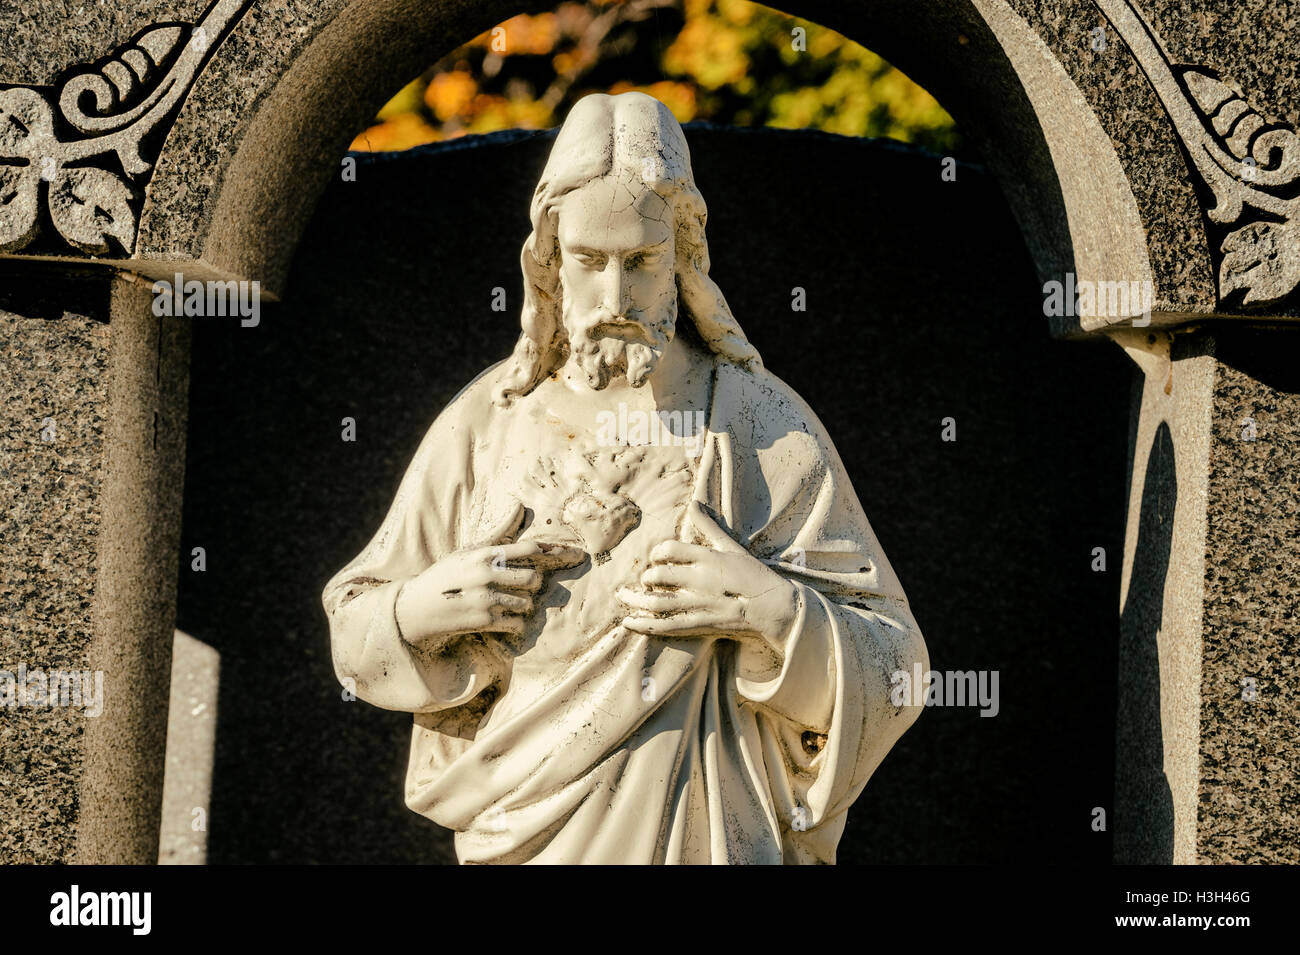 Christ Statue with head down in a cemetery Stock Photo